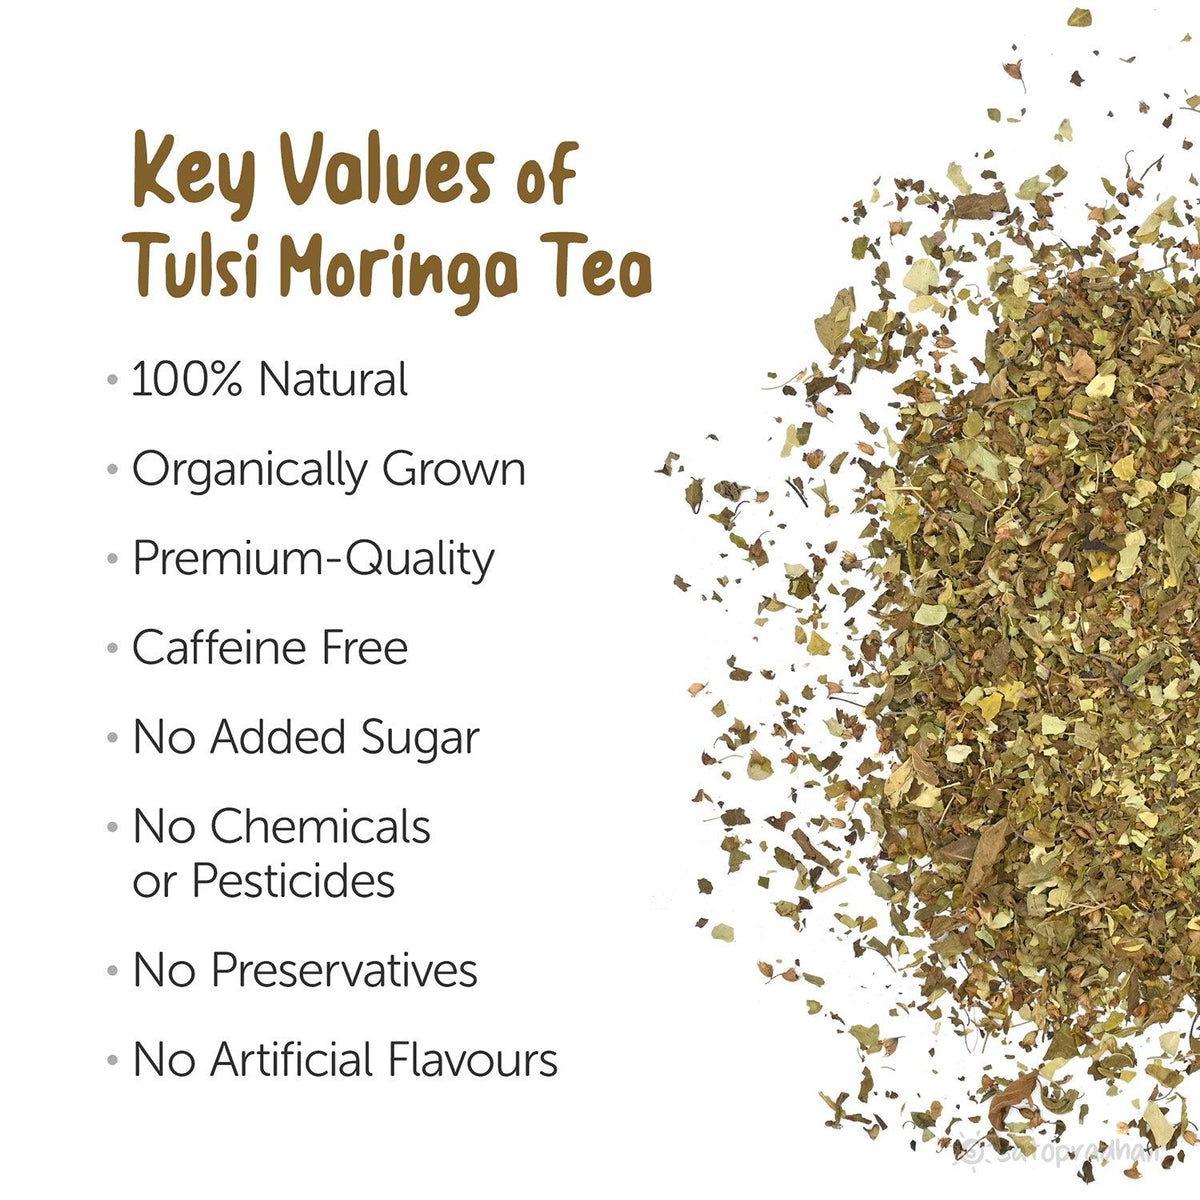 Tulsi Moringa Tea Key Values - Organic & Naturally Shade Dried Blend 50g - Sugar free & Caffeine free without Preservatives or Artificial Flavours